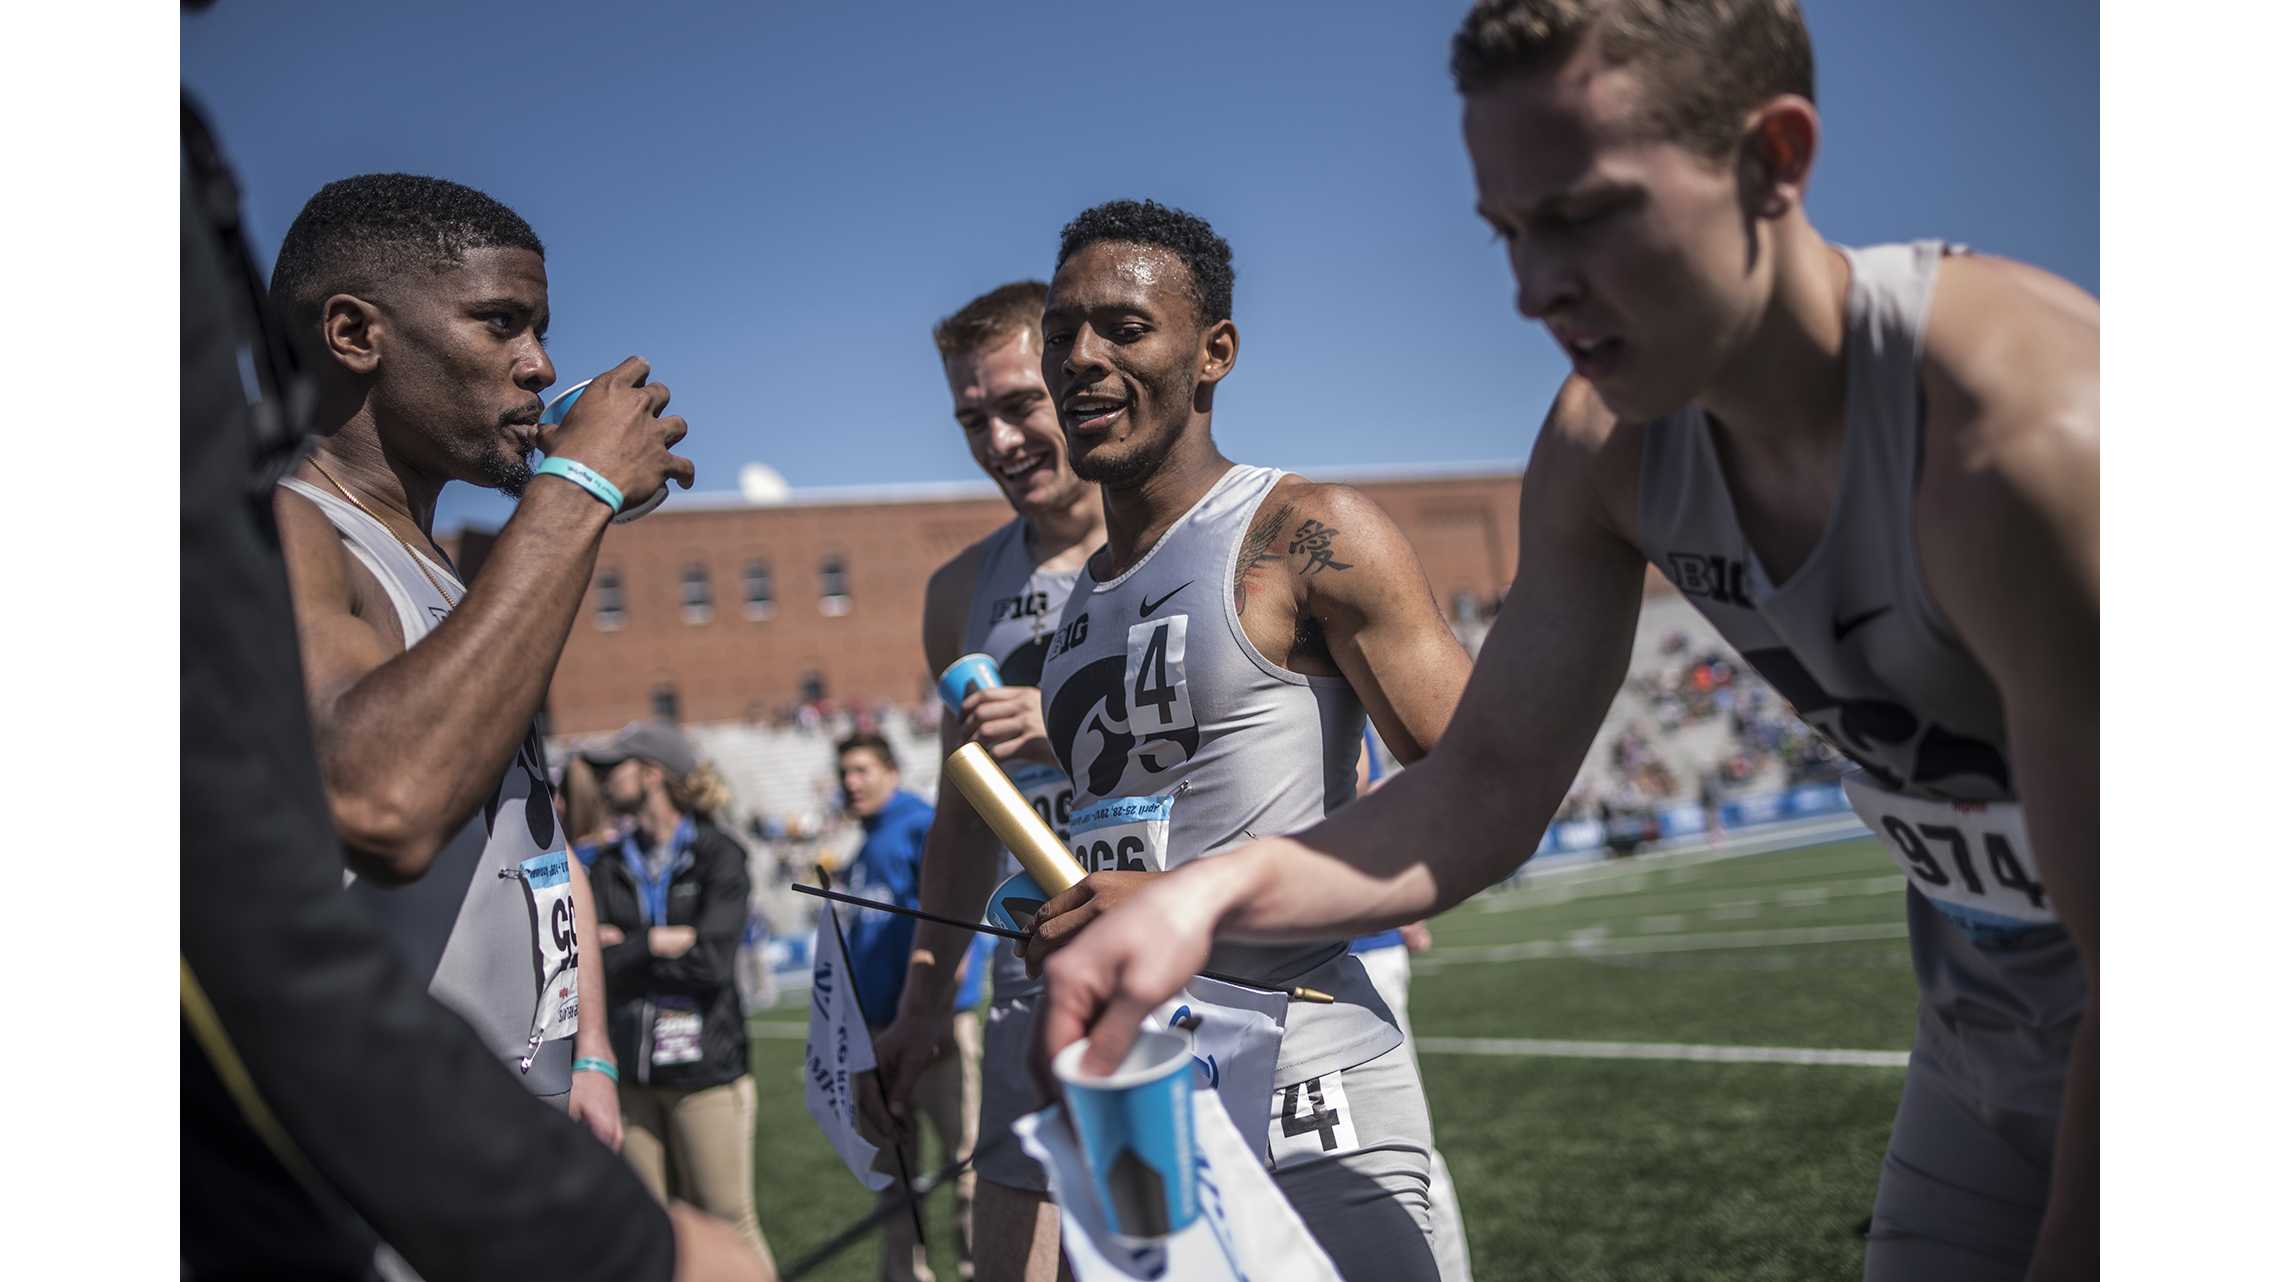 From left: Iowas DeJuan Frye, Collin Hofacker, MarYea Harris, and Chris Thompson rehydrate following their victory in the mens 4x400 meter relay during the 2018 Drake Relays at Drake Stadium in Des Moines, Iowa on Saturday, April 28, 2018.